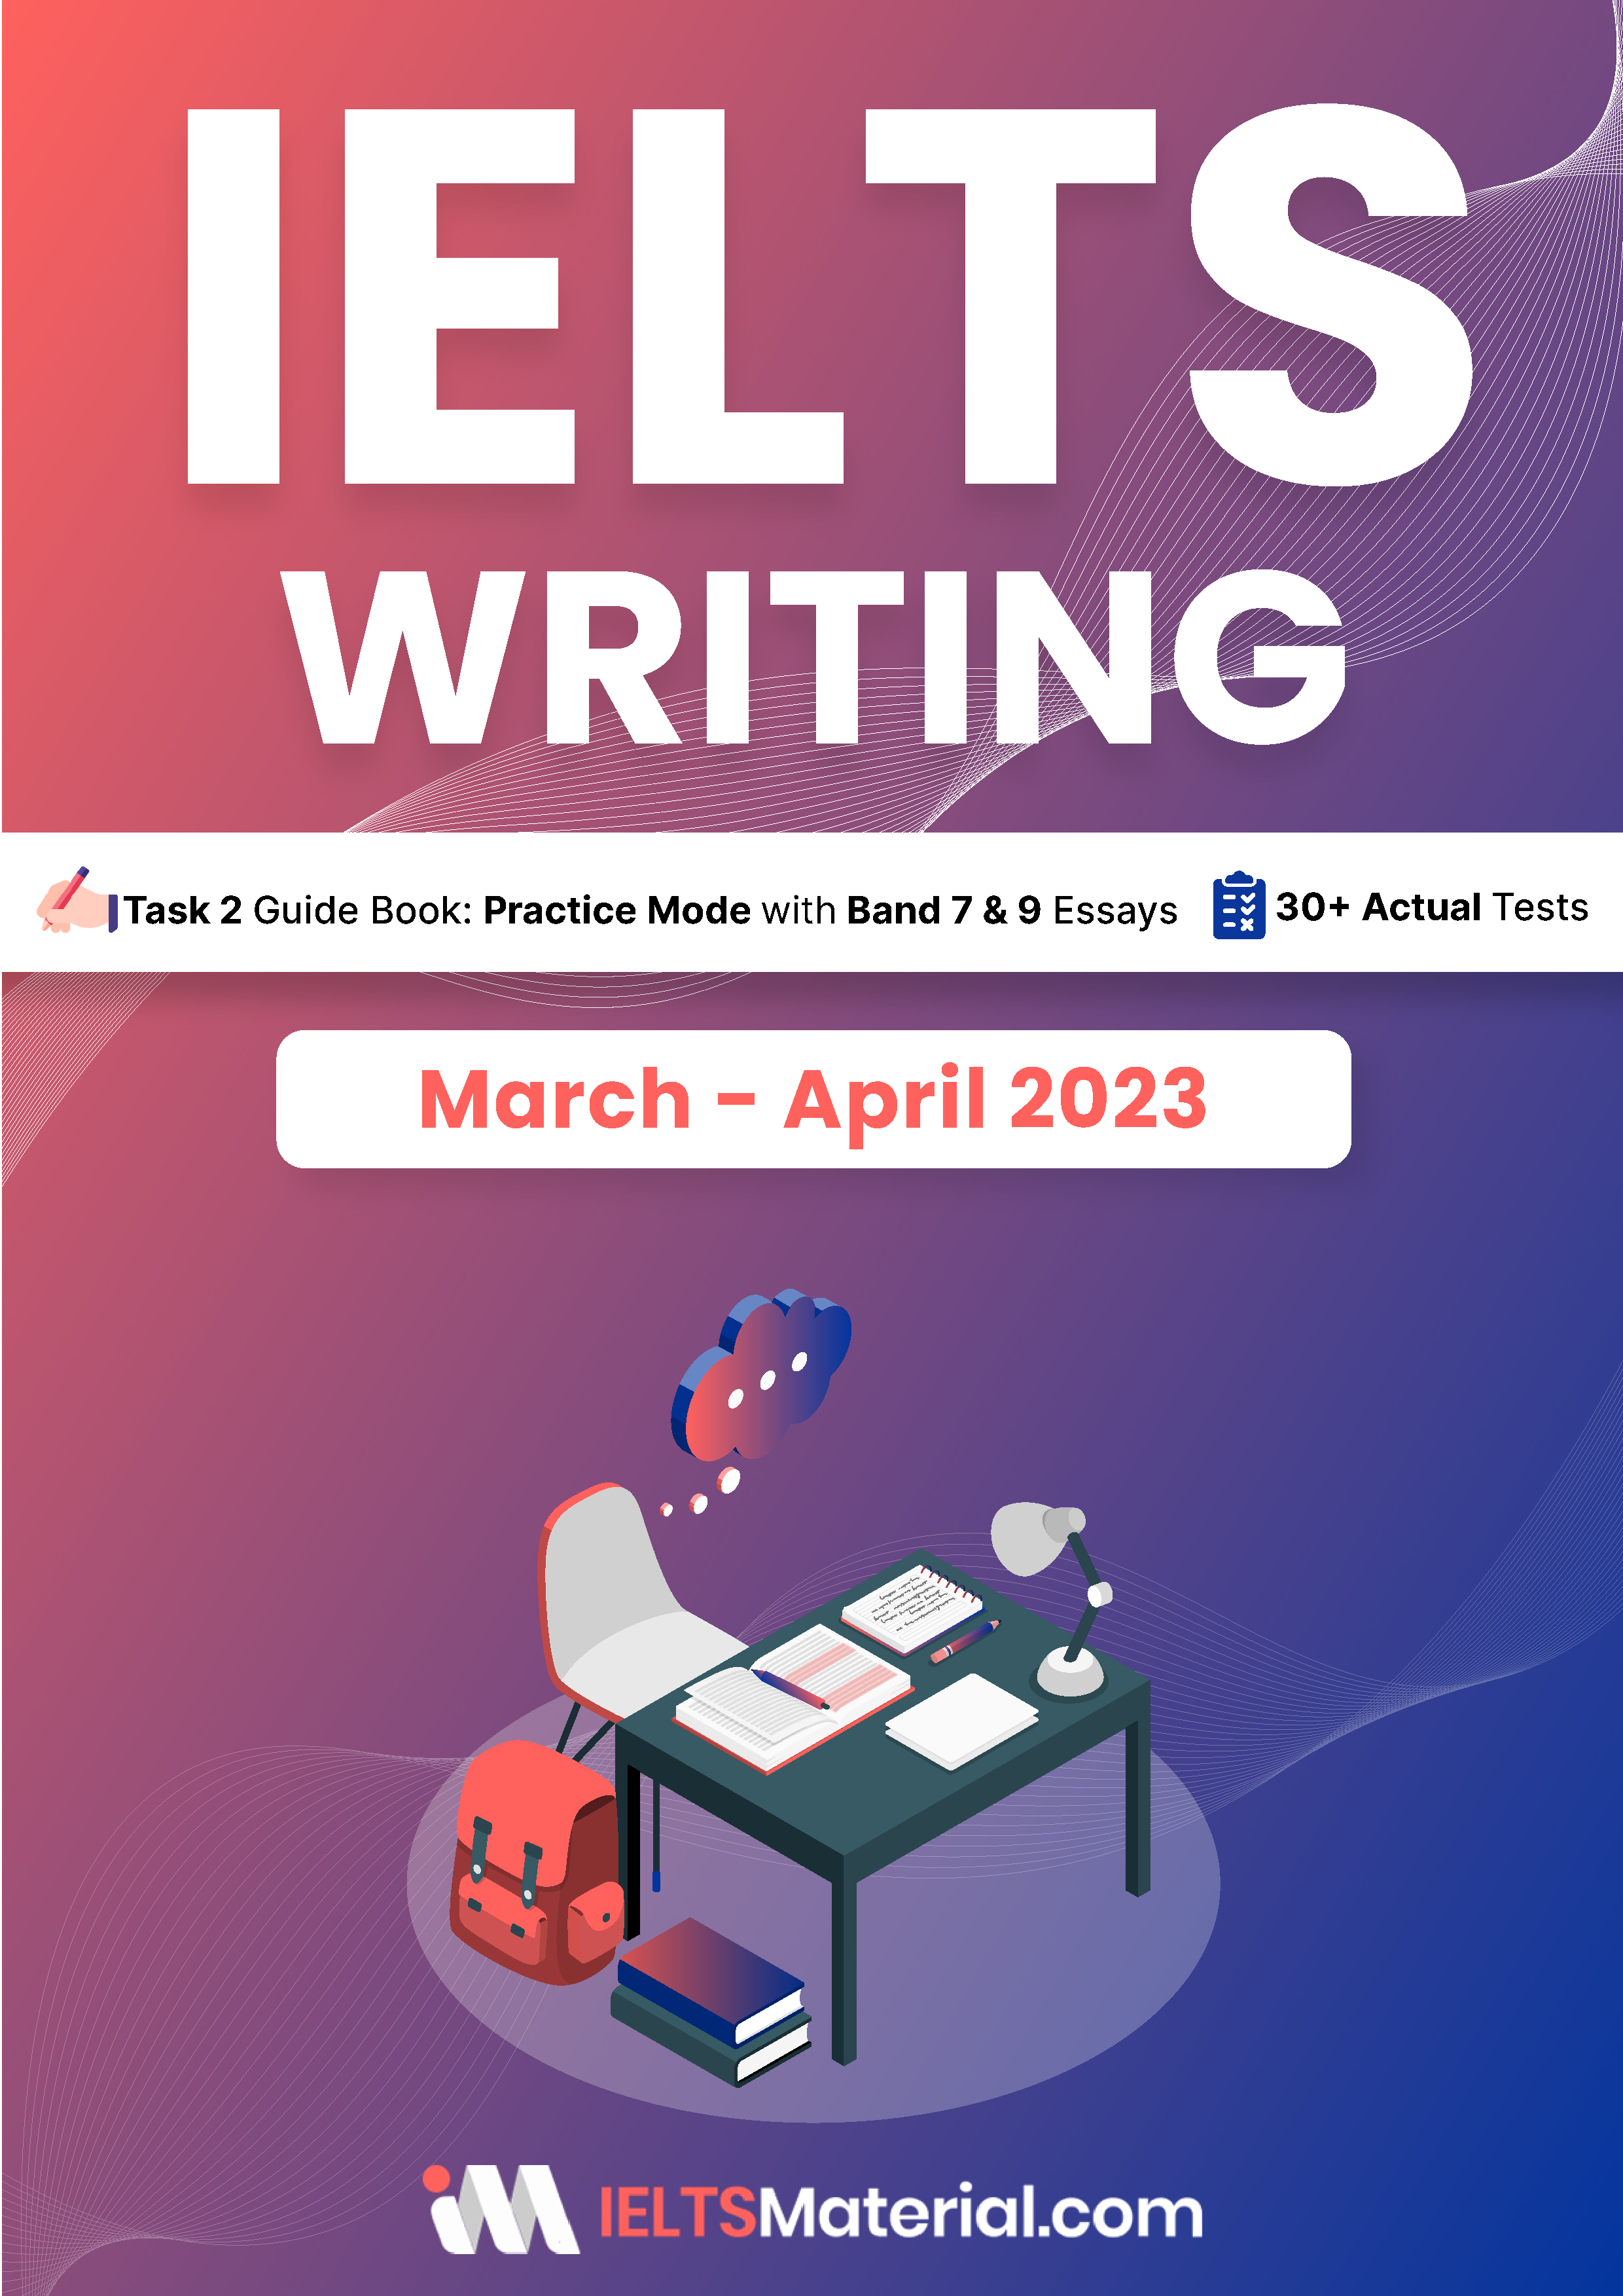 IELTS (Academic) Writing Actual Tests eBook Combo (March-April 2023) [Task 1+ Task 2]